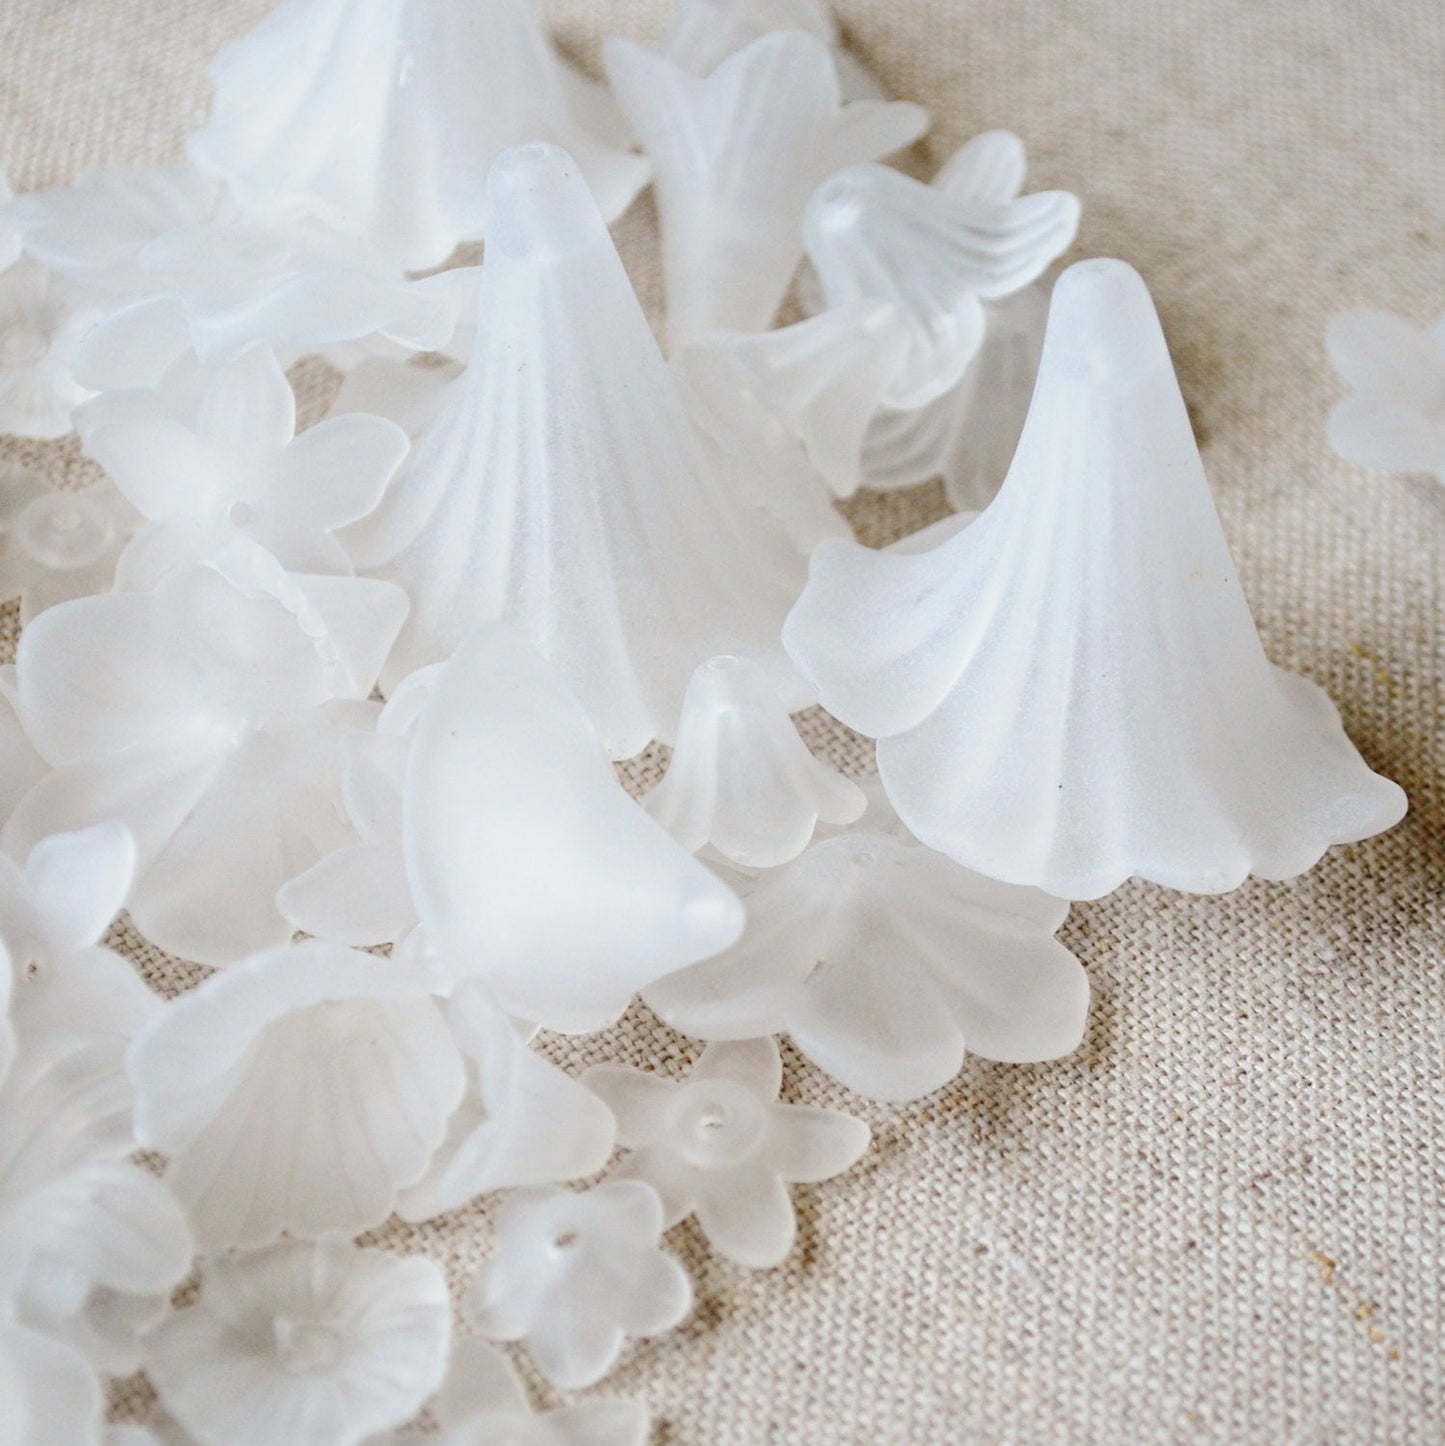 Assorted Frosted Flower Beads Semi-Translucent White in Random Sizes and Shapes